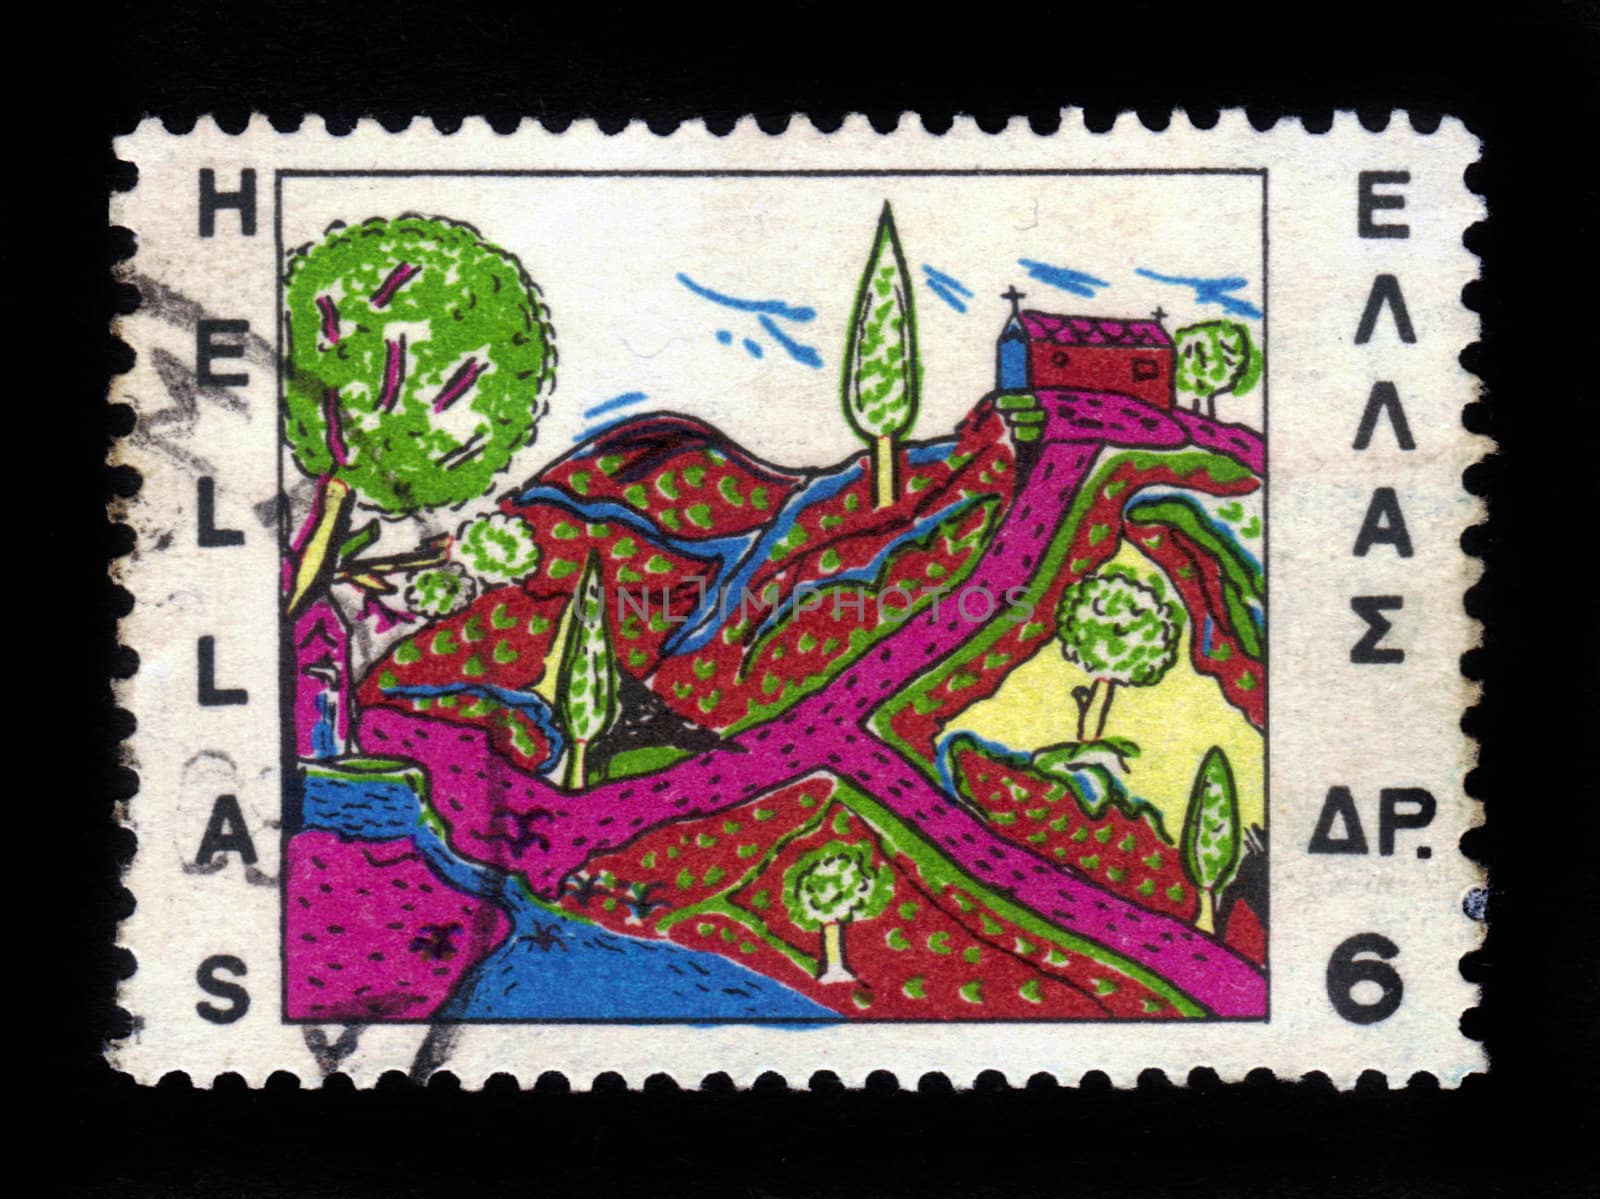 GREECE - CIRCA 1966: stamp printed by Greece, shows popular art, temple on the hill, circa 1966